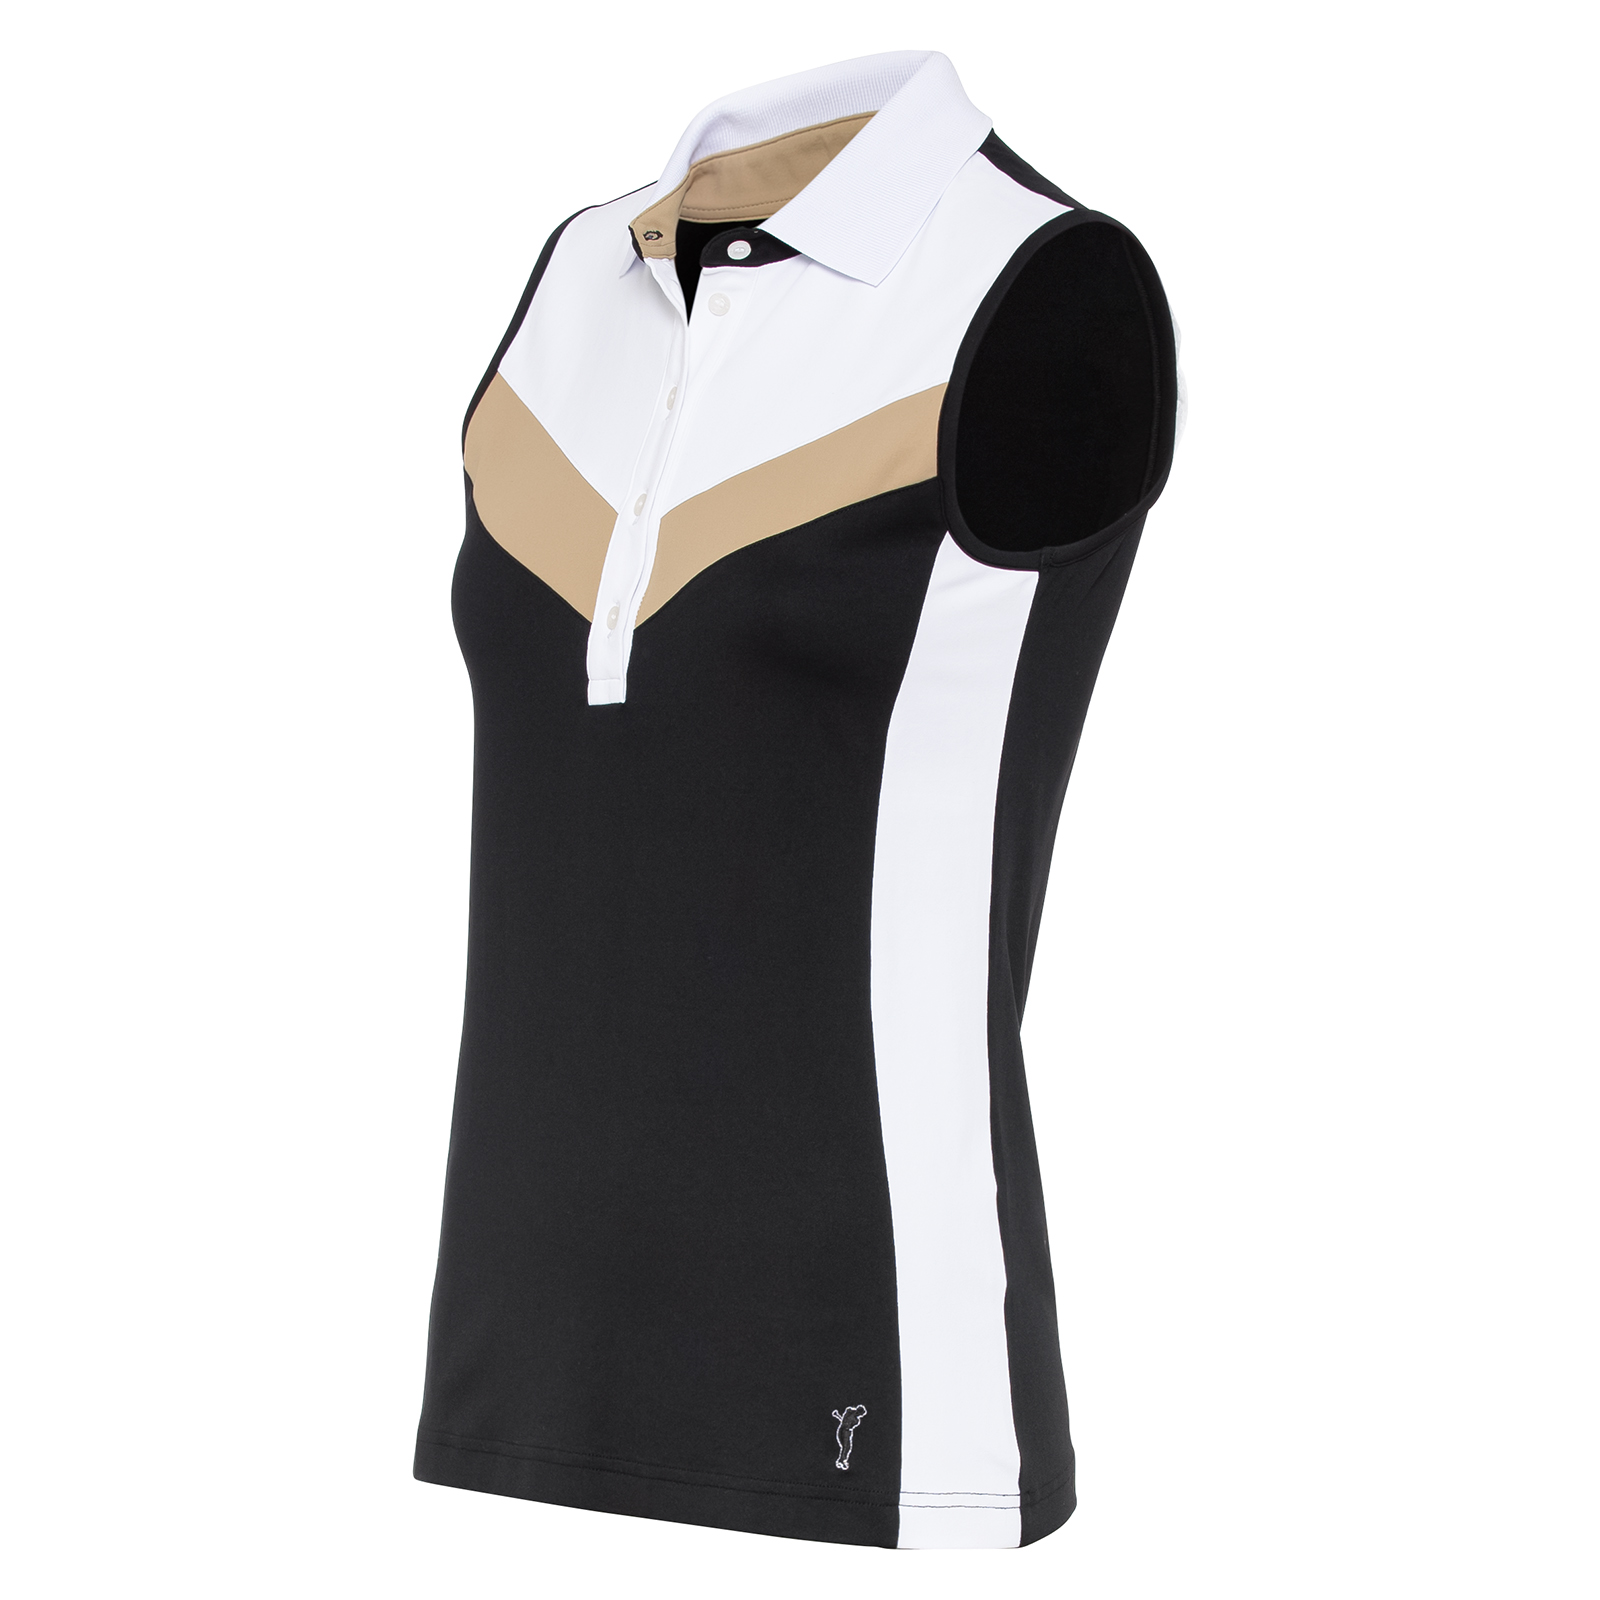 Ladies' sleeveless golf polo shirt with moisture management function